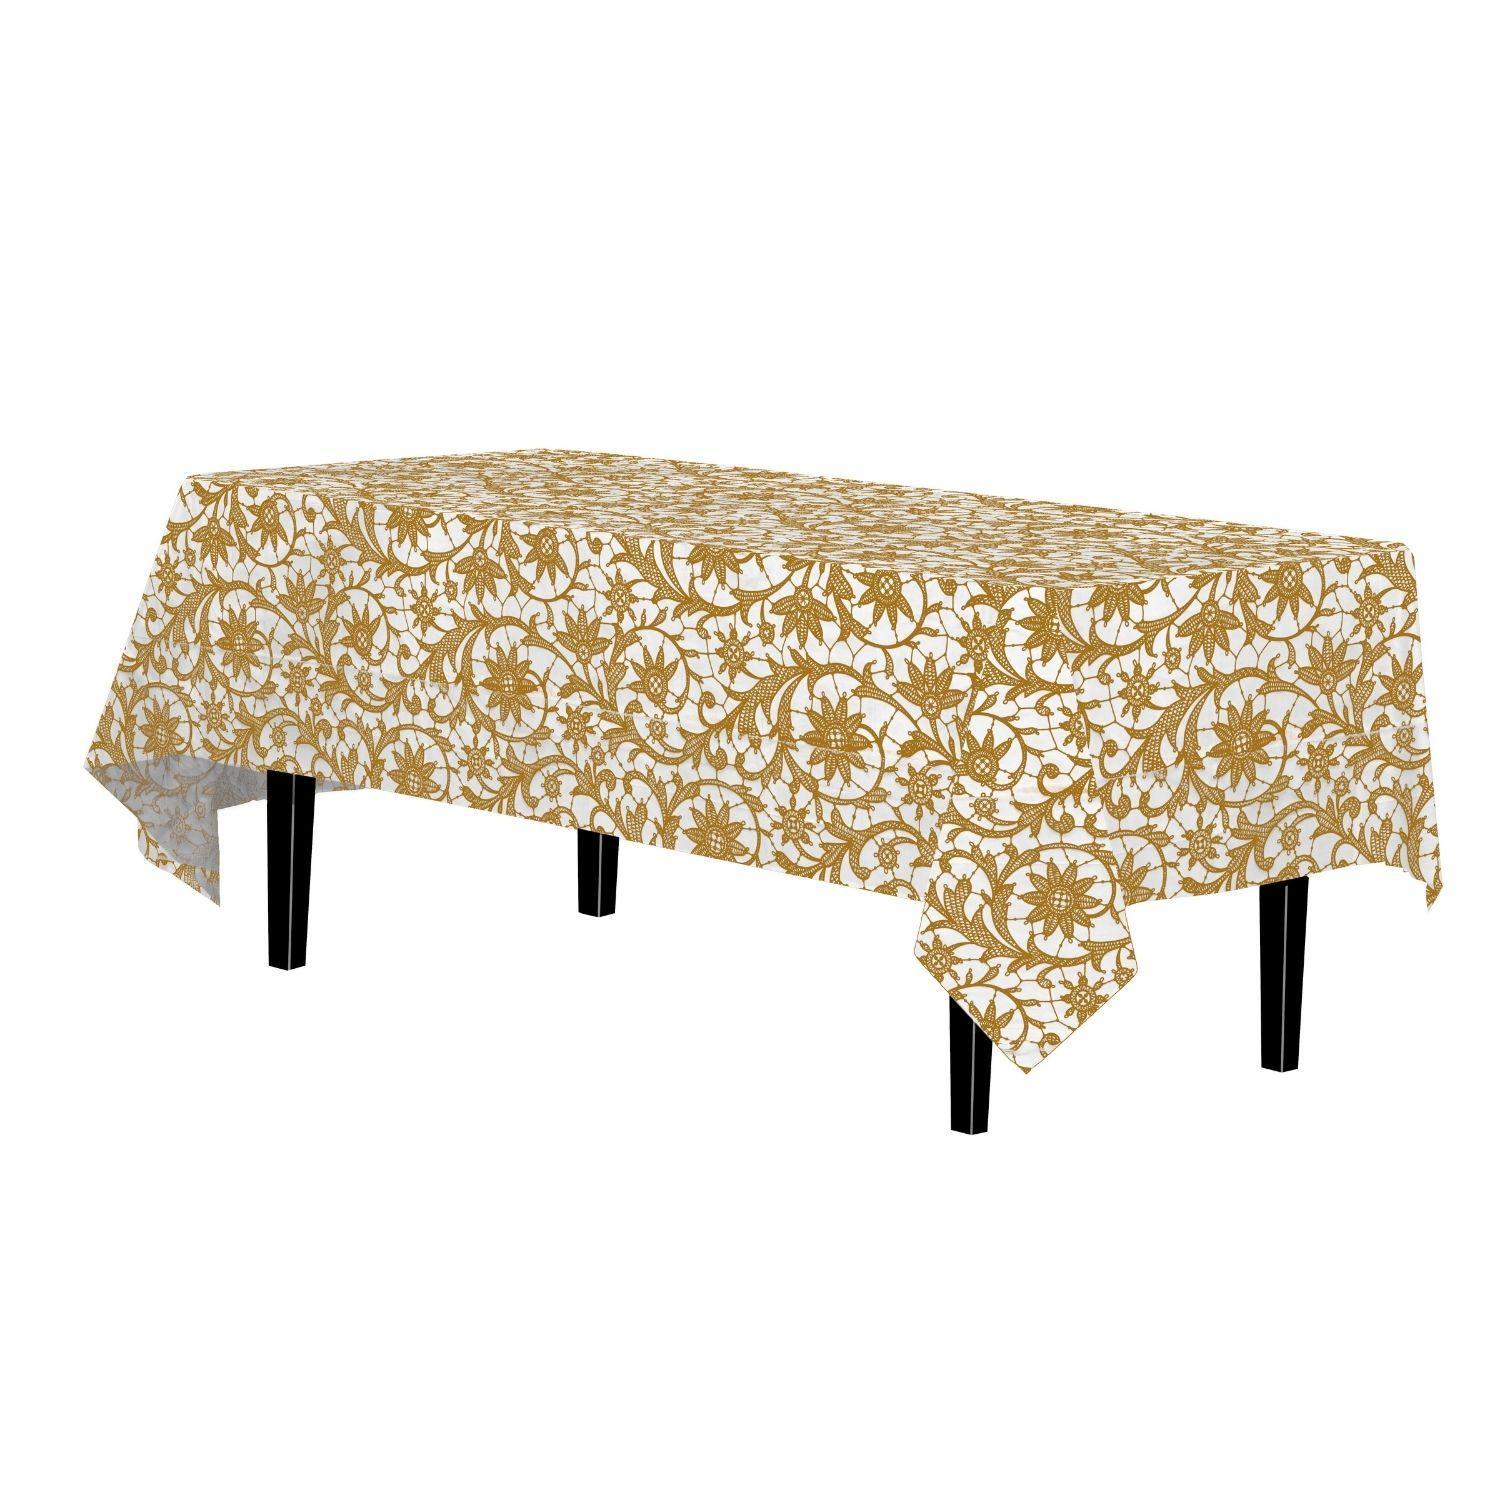 54in. x 108in. Printed Plastic Table cover Gold Lace - 48 ct.